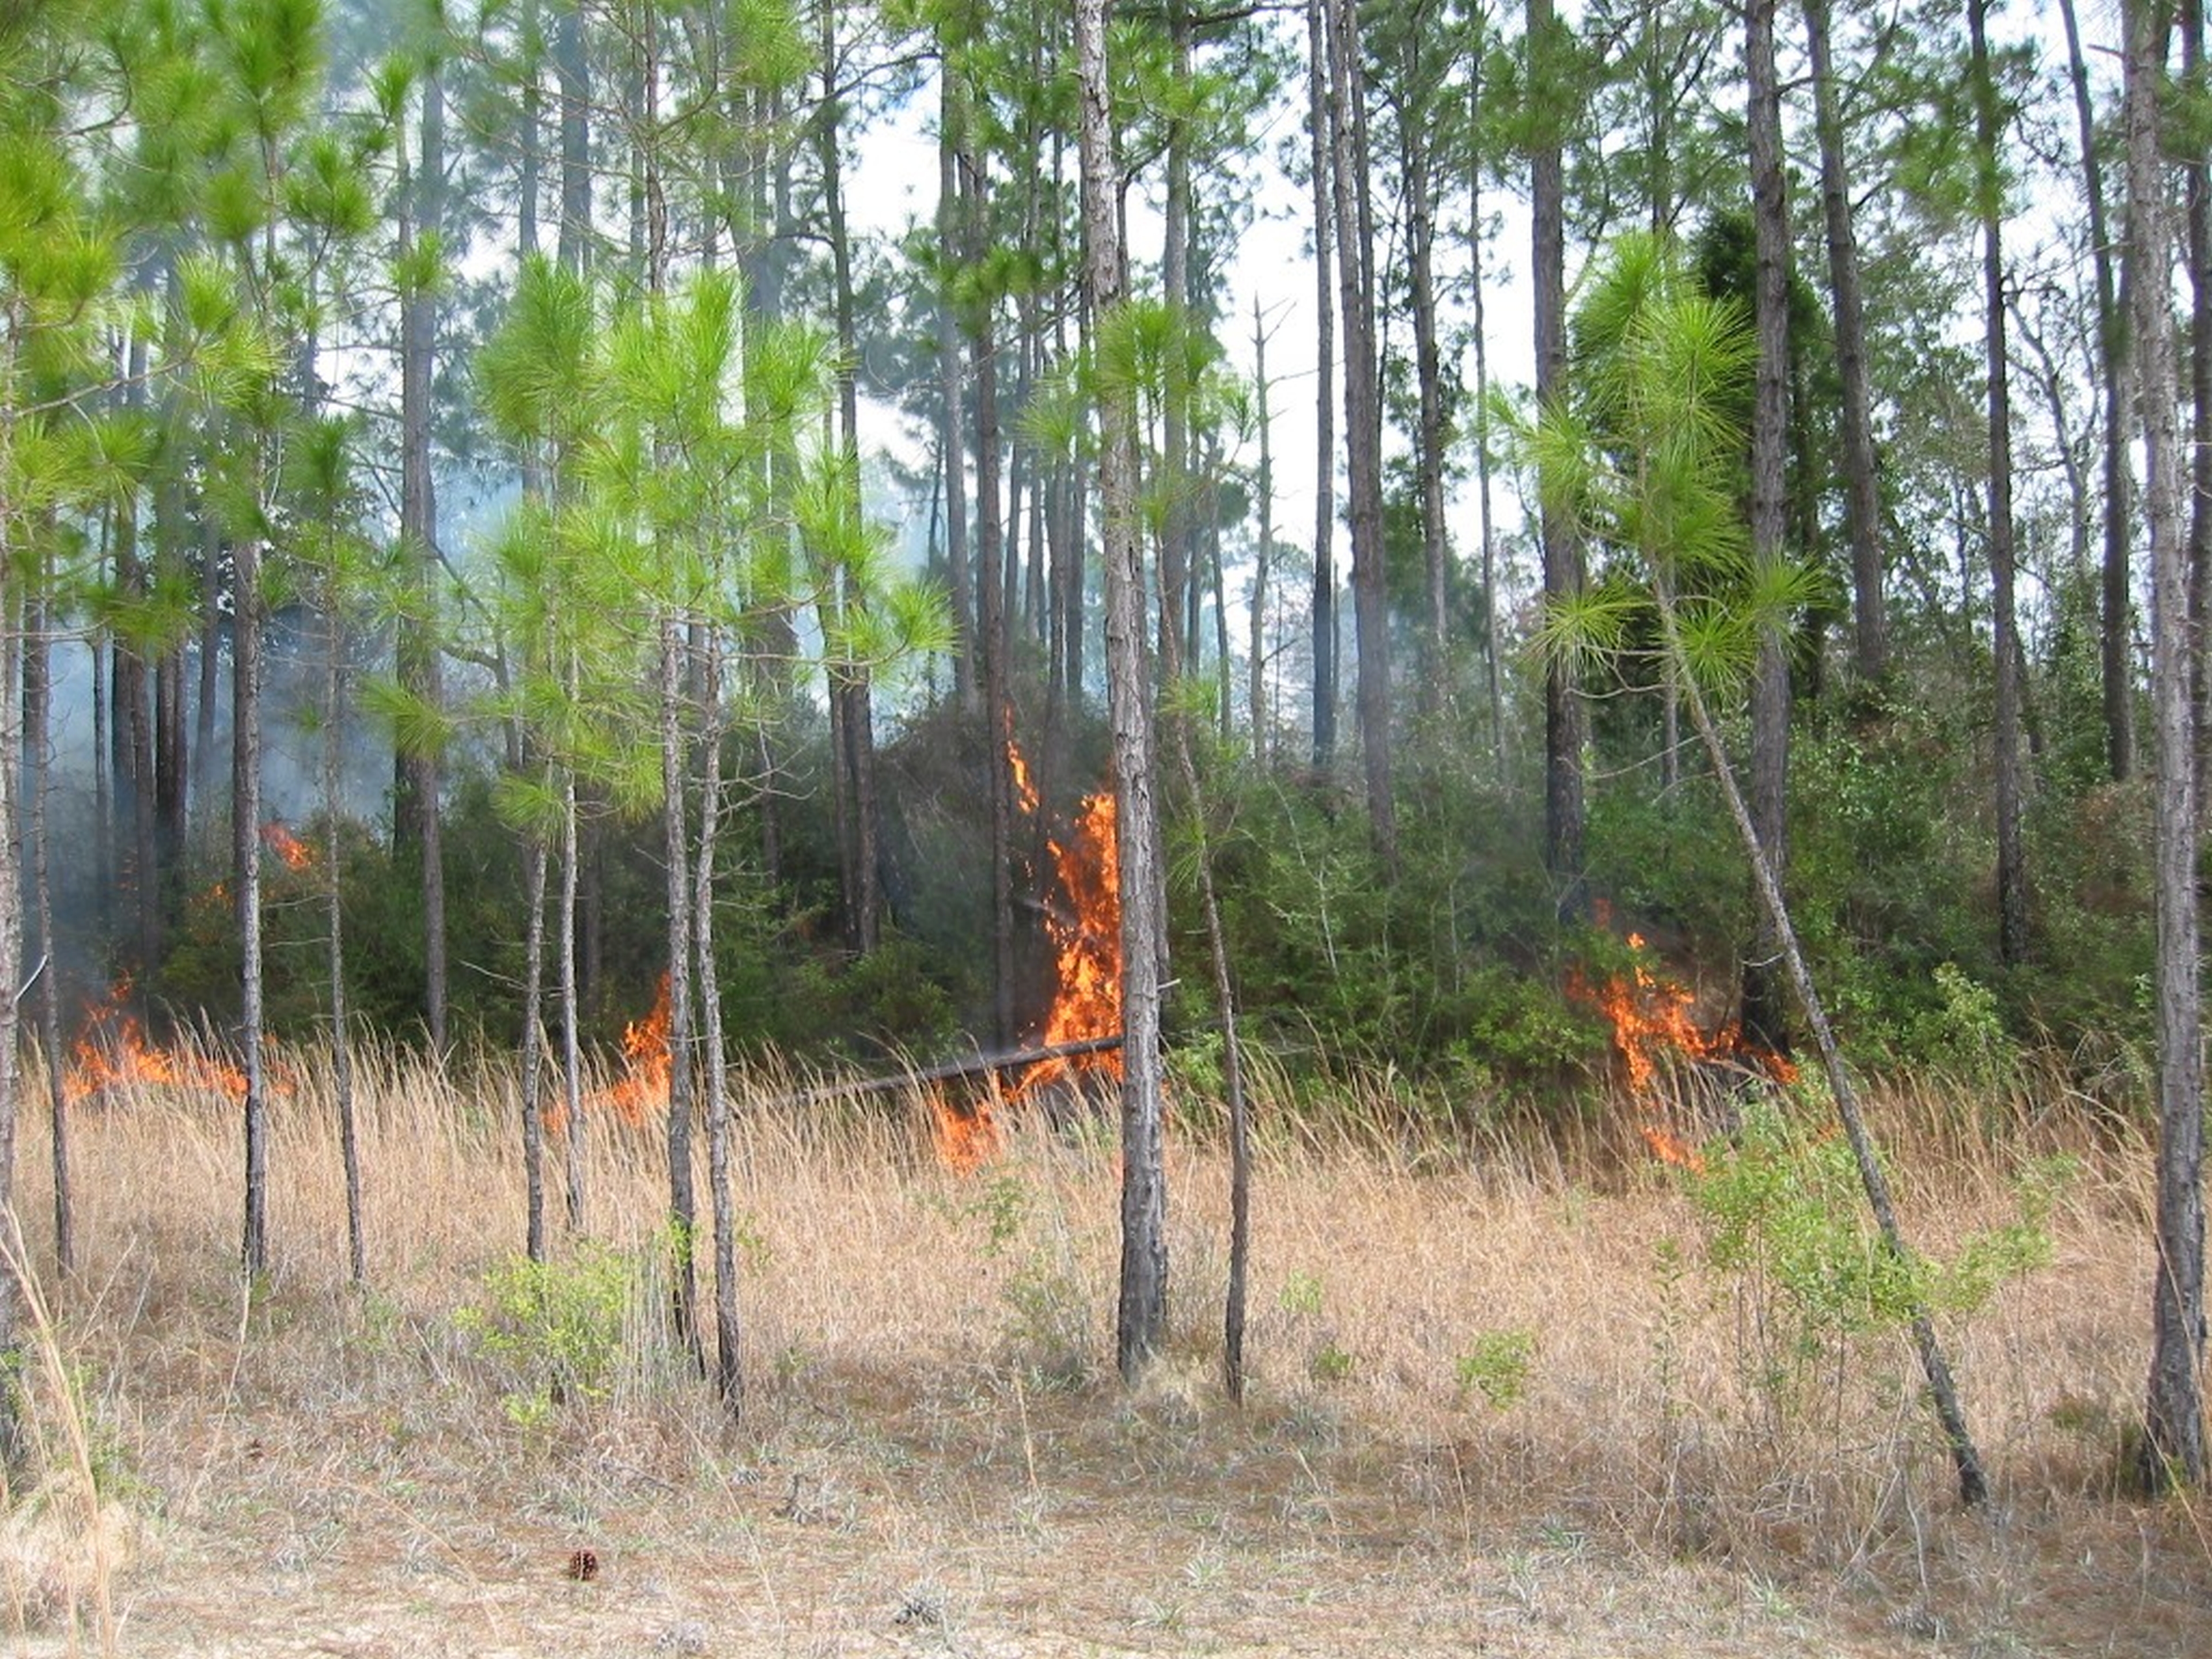 Flames burn among the grasses and young pine saplings during a prescribed firing operation at Grand Bay NWR